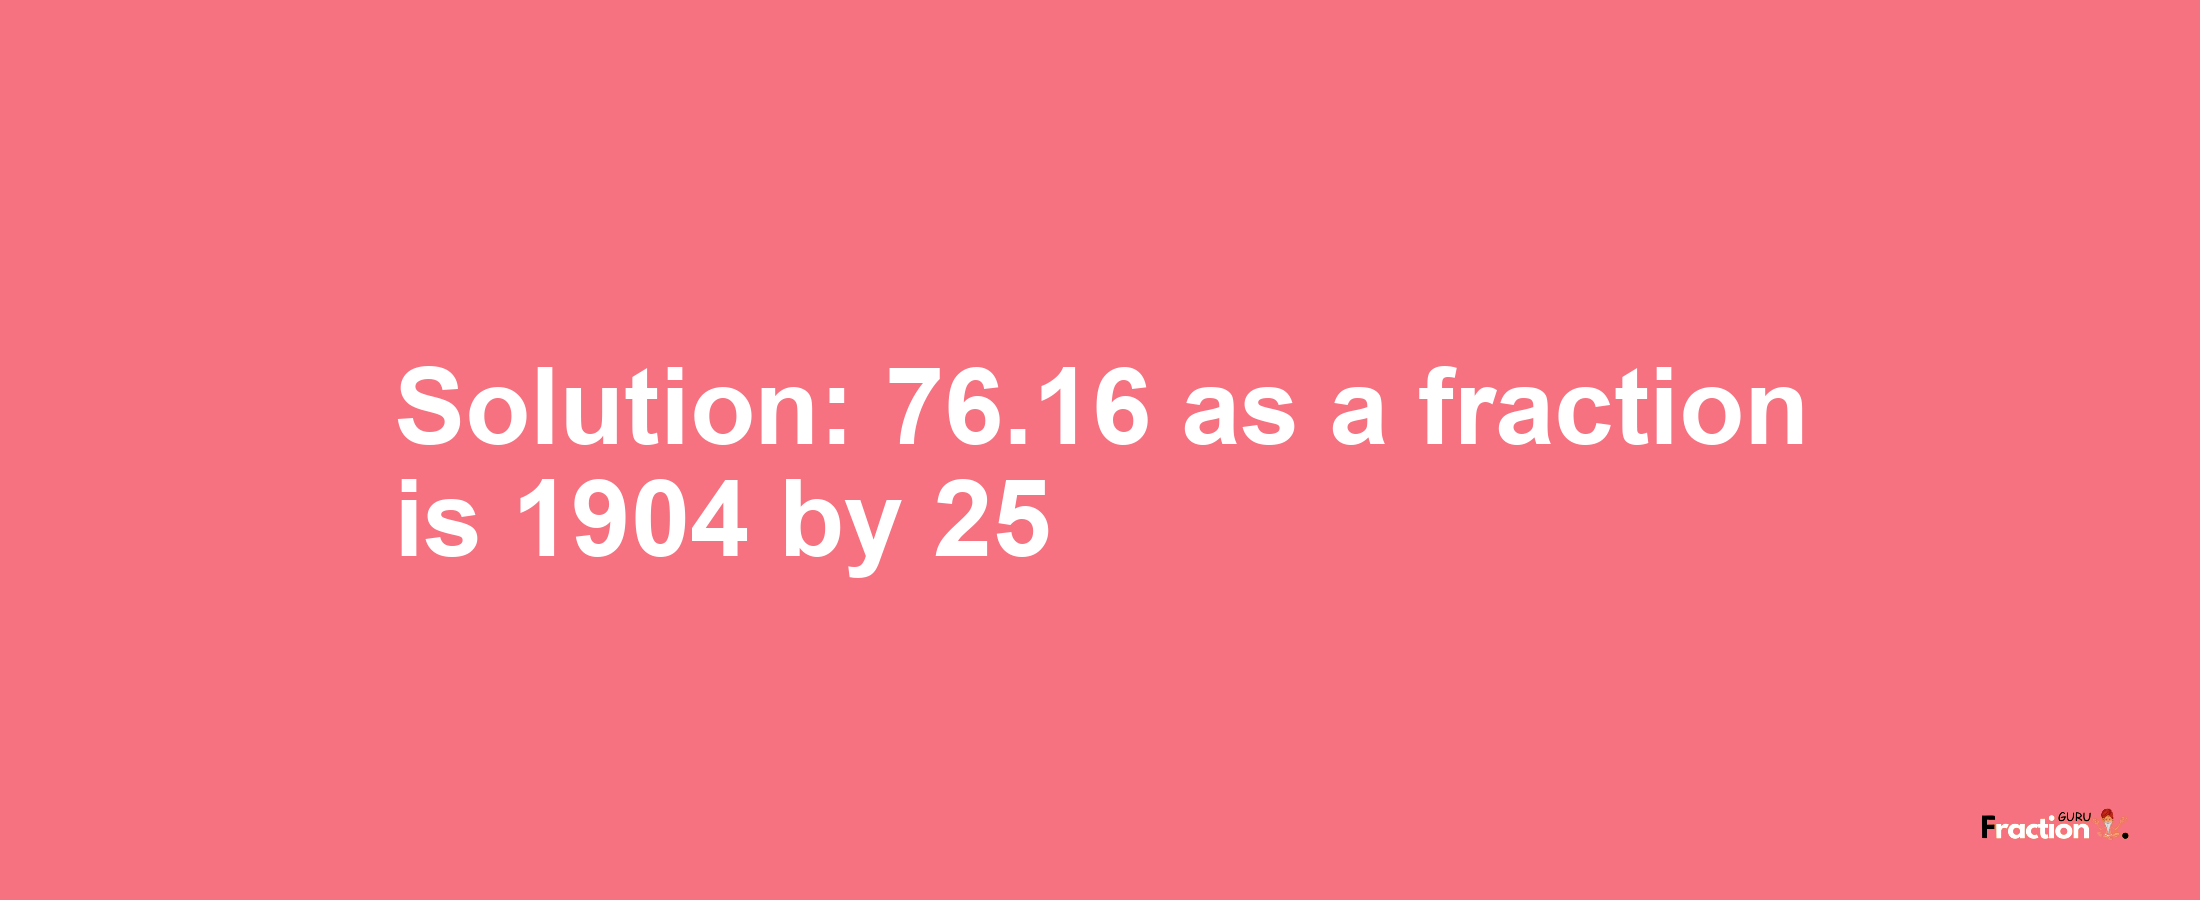 Solution:76.16 as a fraction is 1904/25